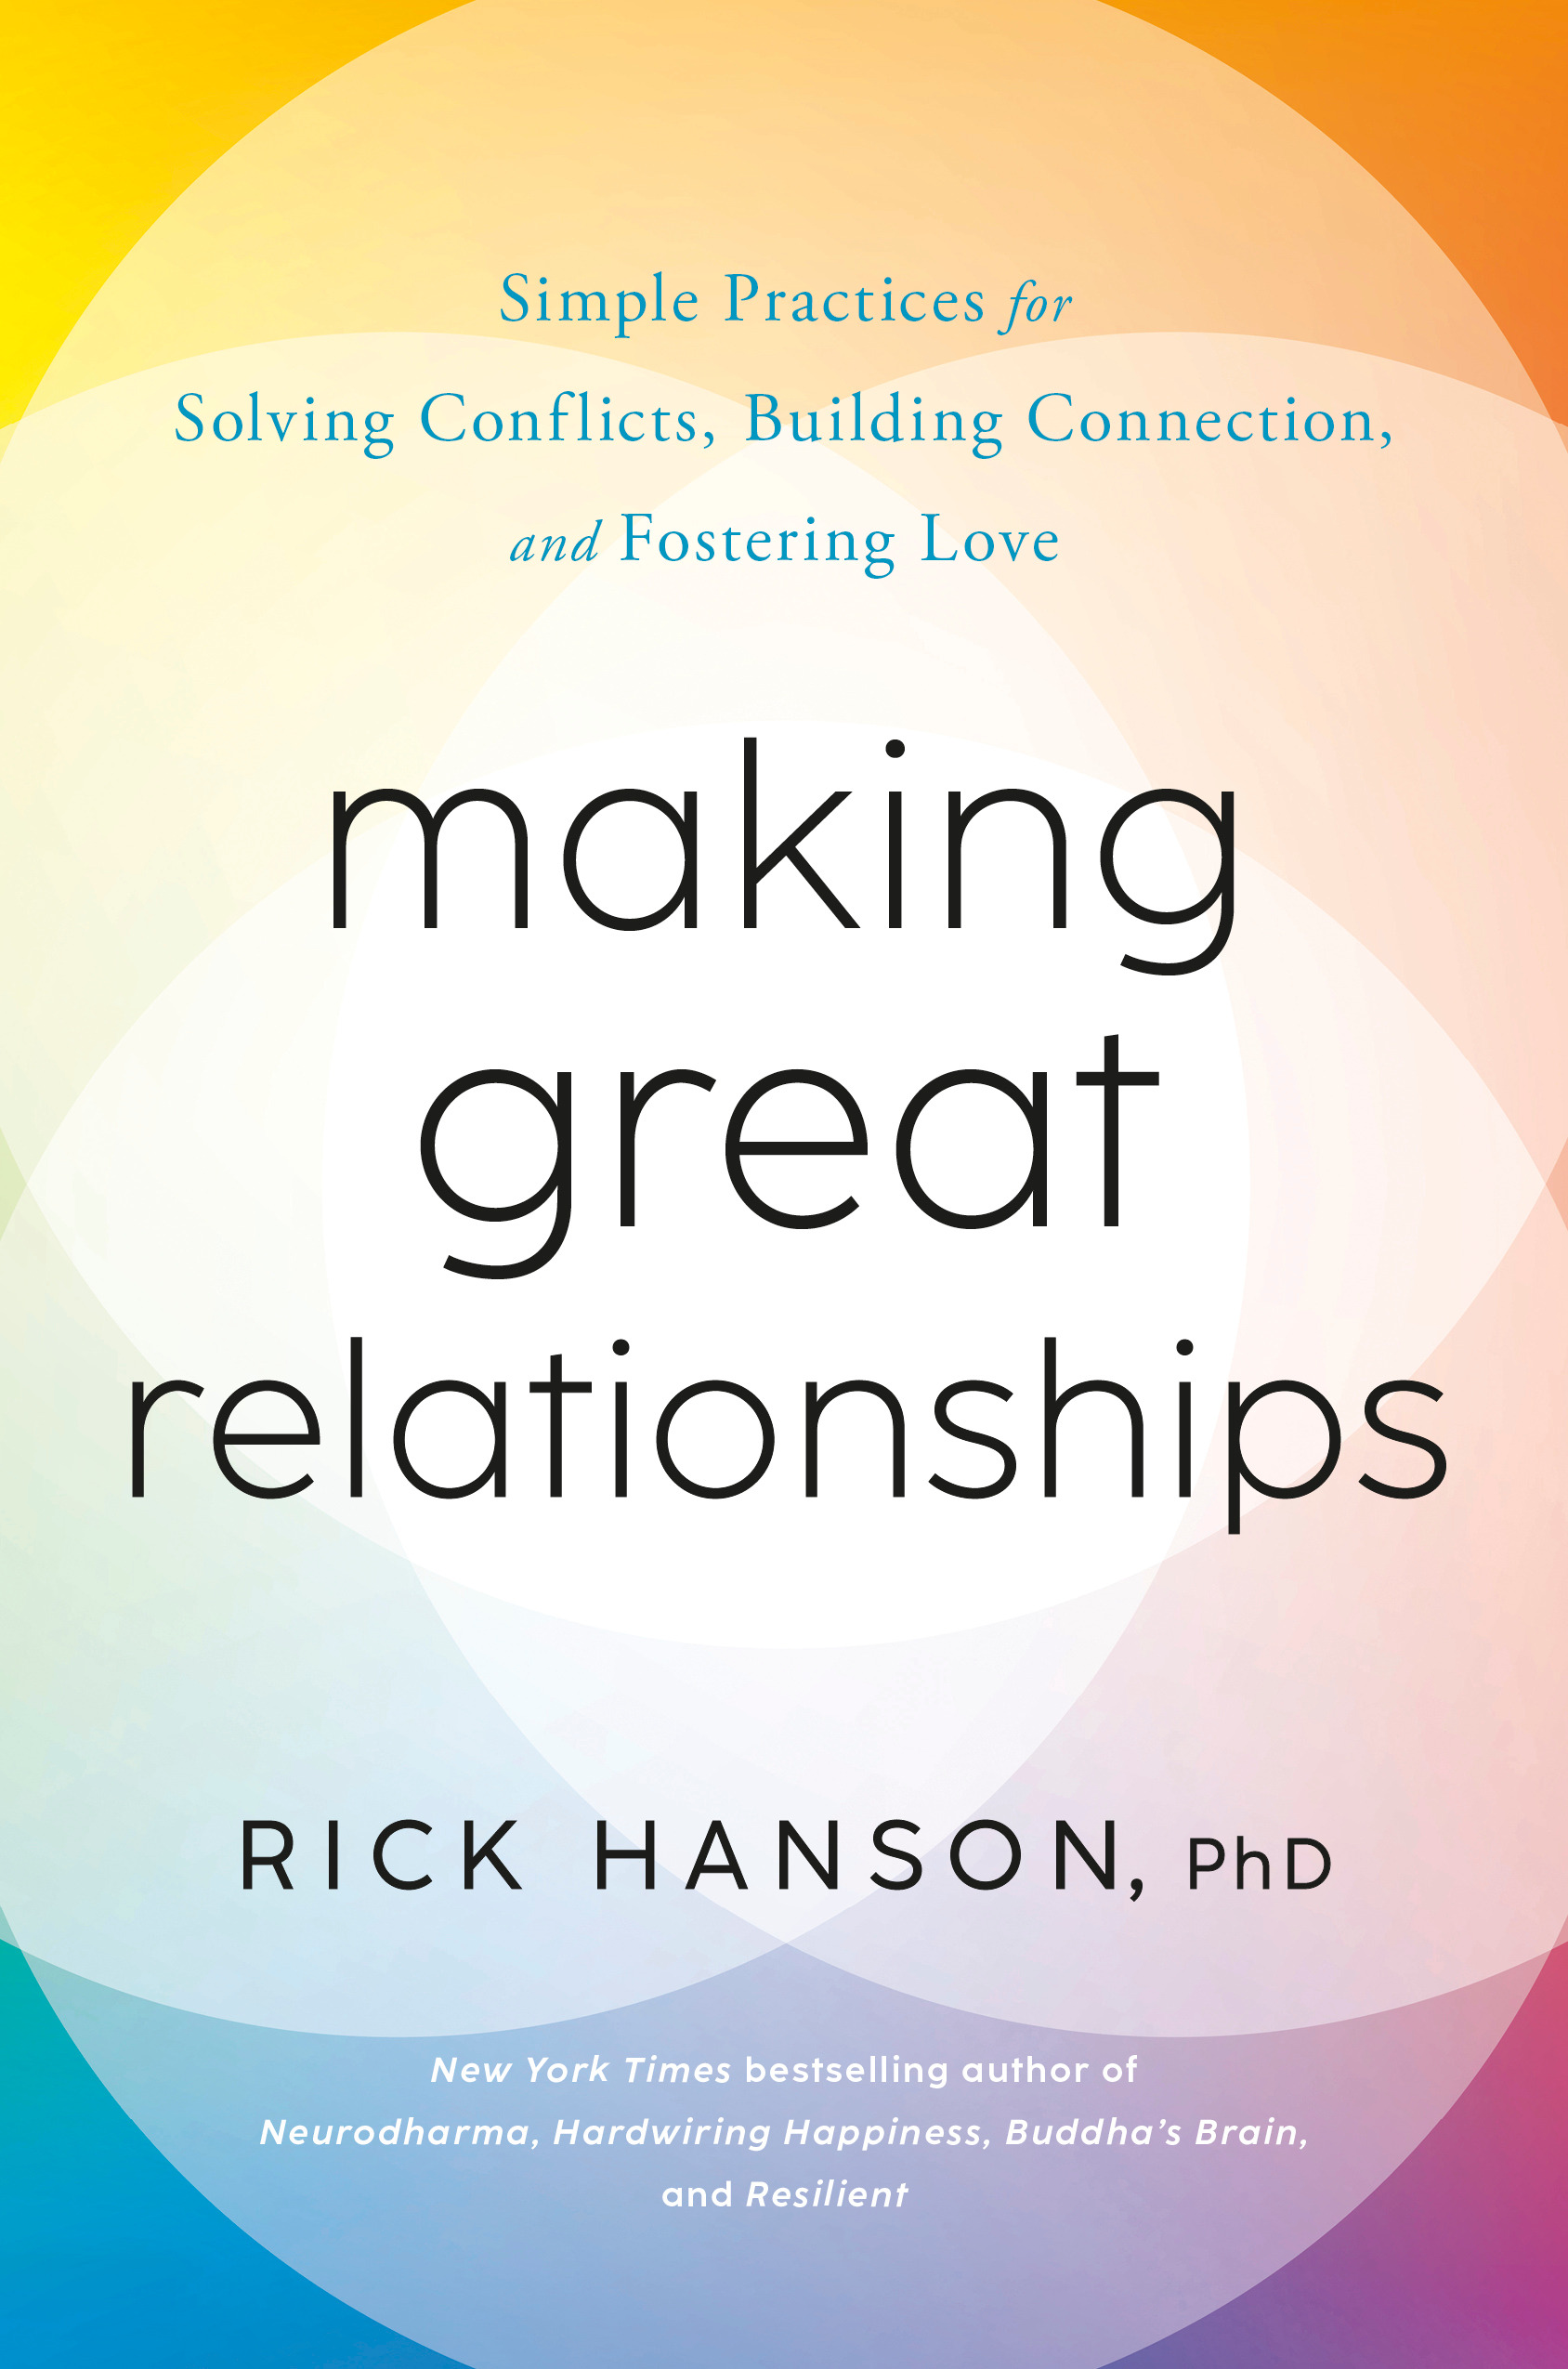 Making Great Relationships : Simple Practices for Solving Conflicts, Building Connection, and Fostering Love | Psychology & Self-Improvement